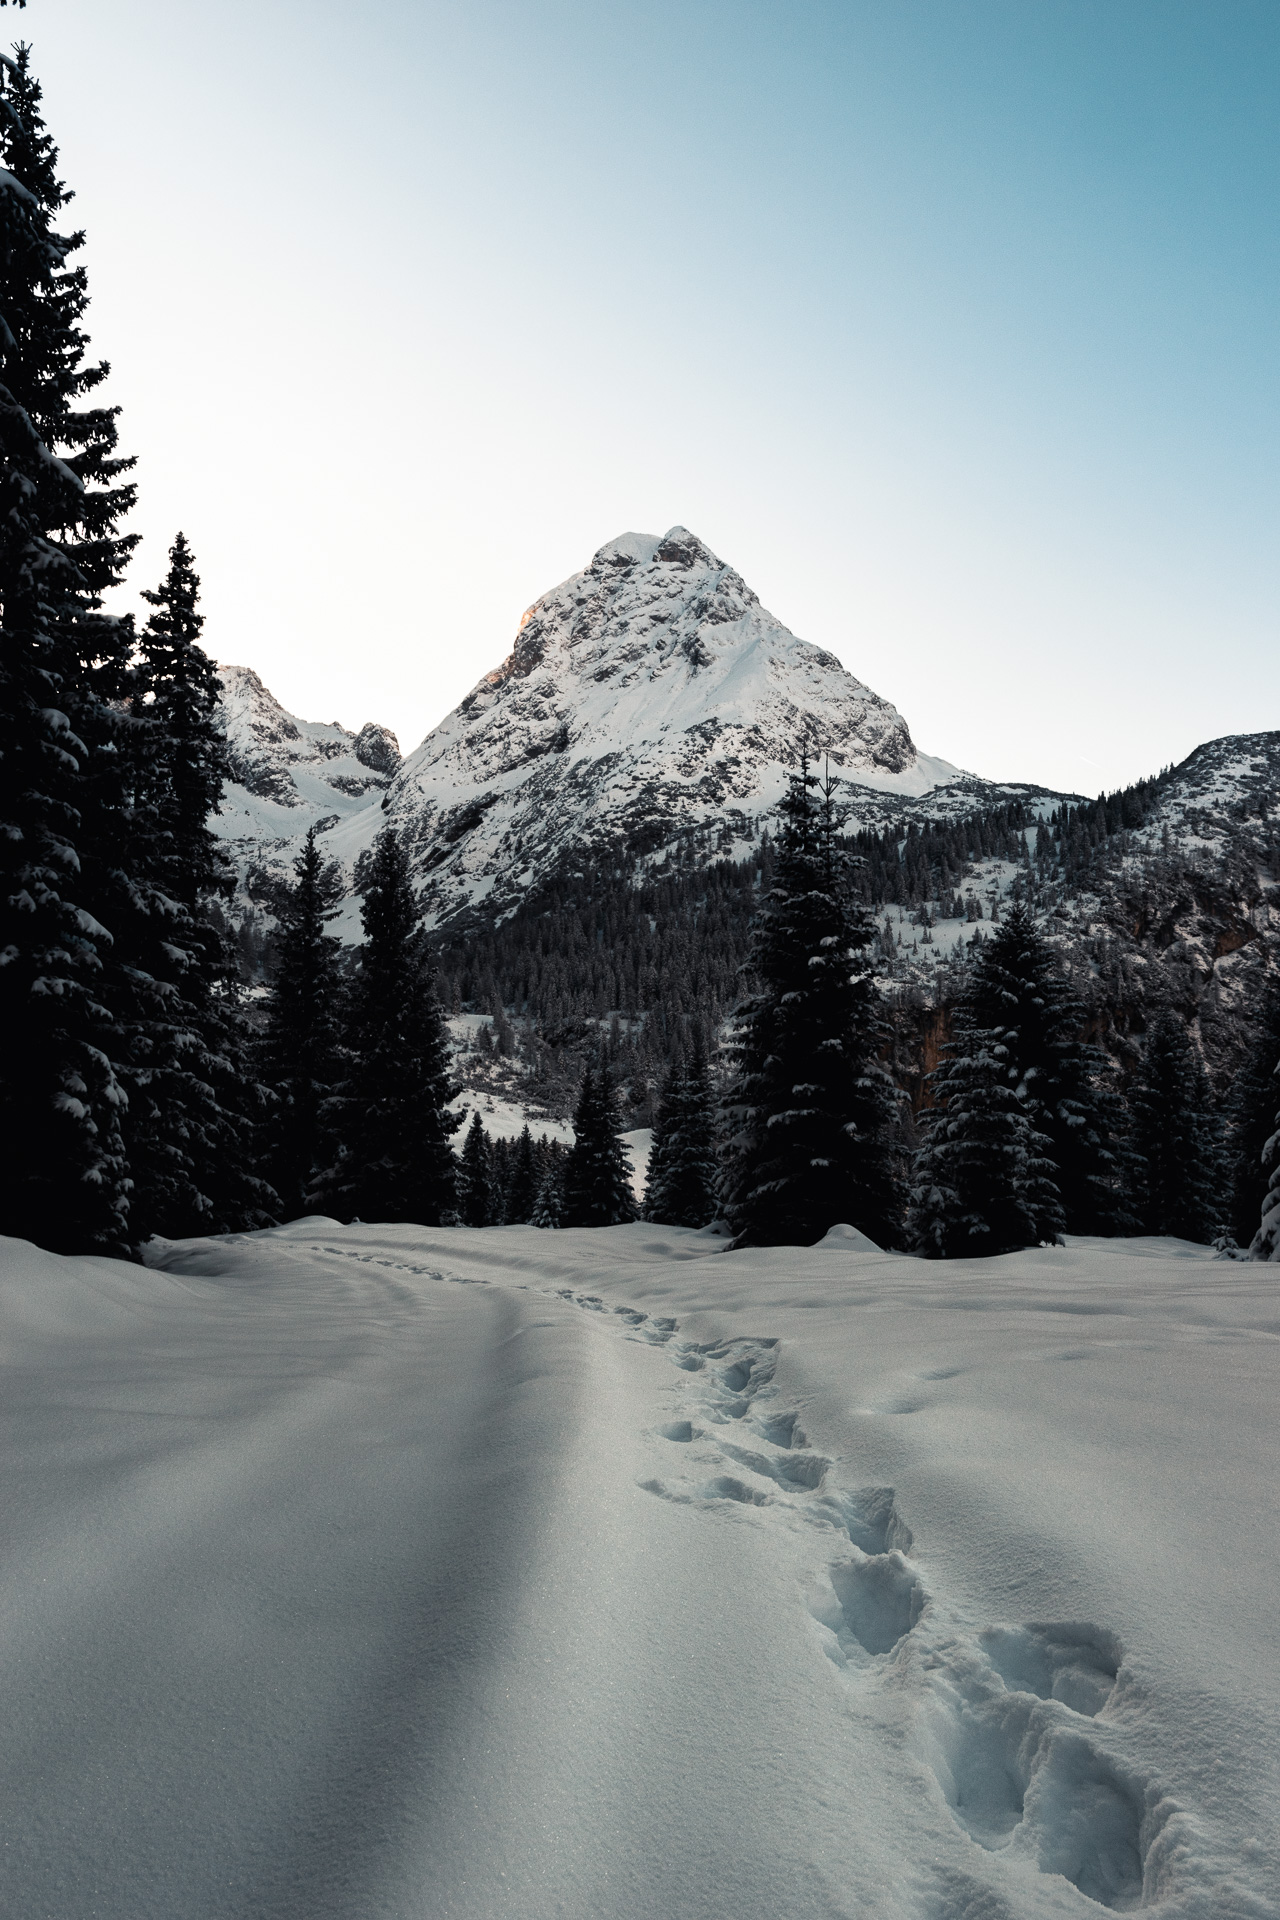 Photo of a winter scene with Sonnespitze in the back ground and footprints in the snow, Austria.